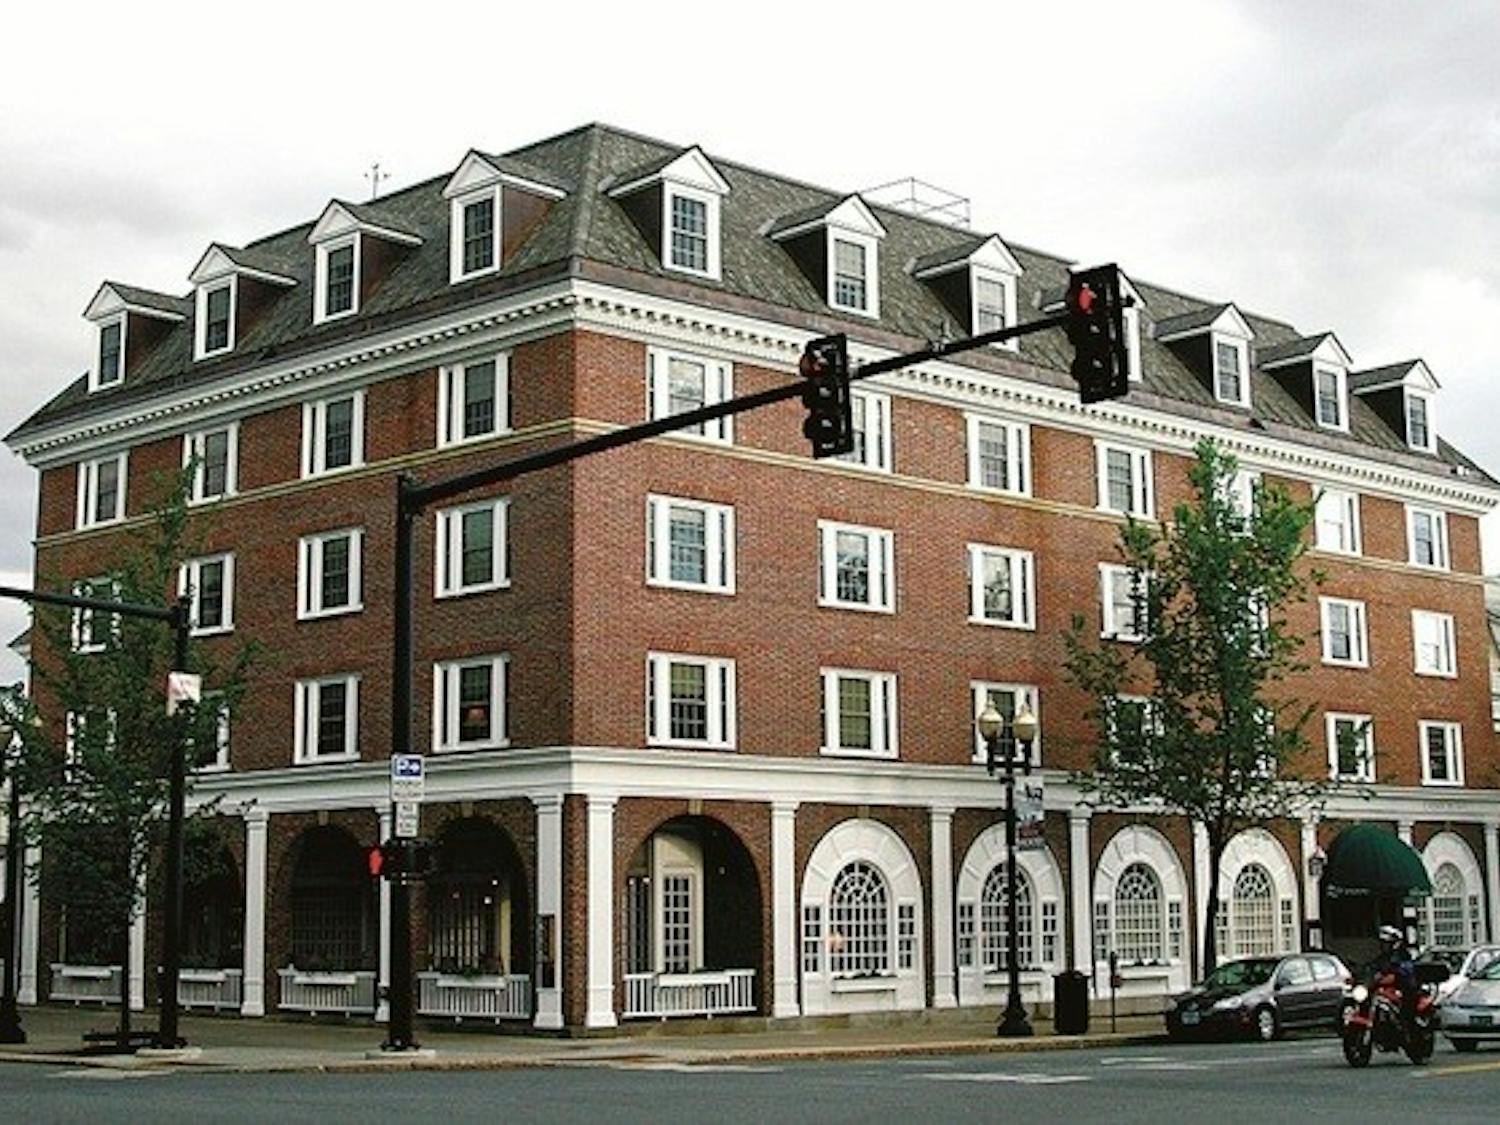 The Pyramid Hotel Group will begin running the daily operations of the Hanover Inn on August 1.